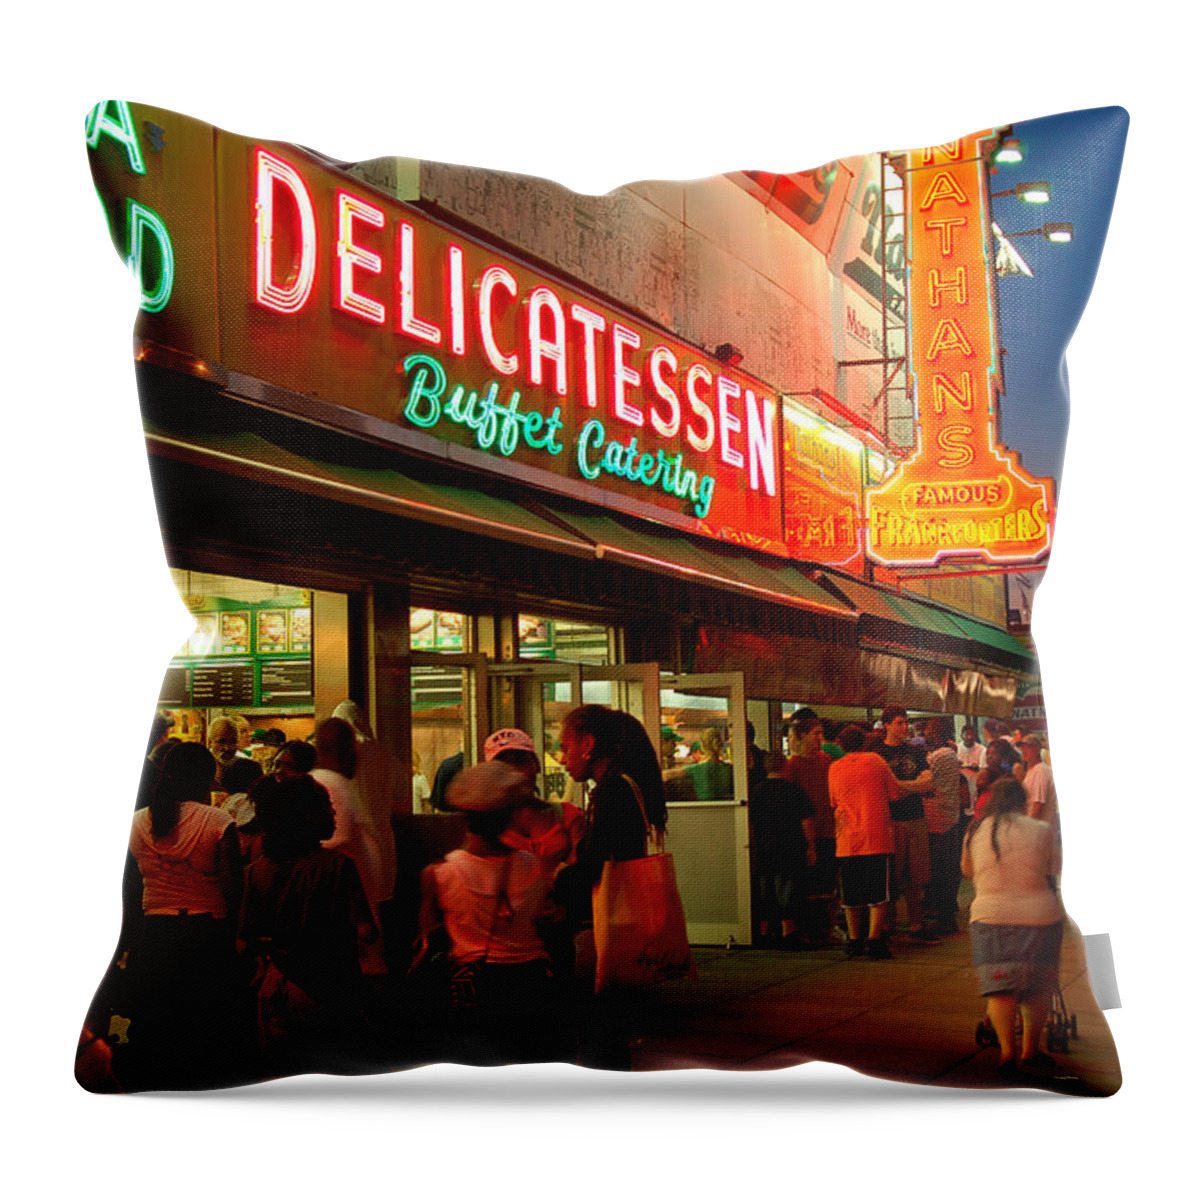 Nathans Throw Pillow featuring the photograph Nathans Coney Island by James Kirkikis